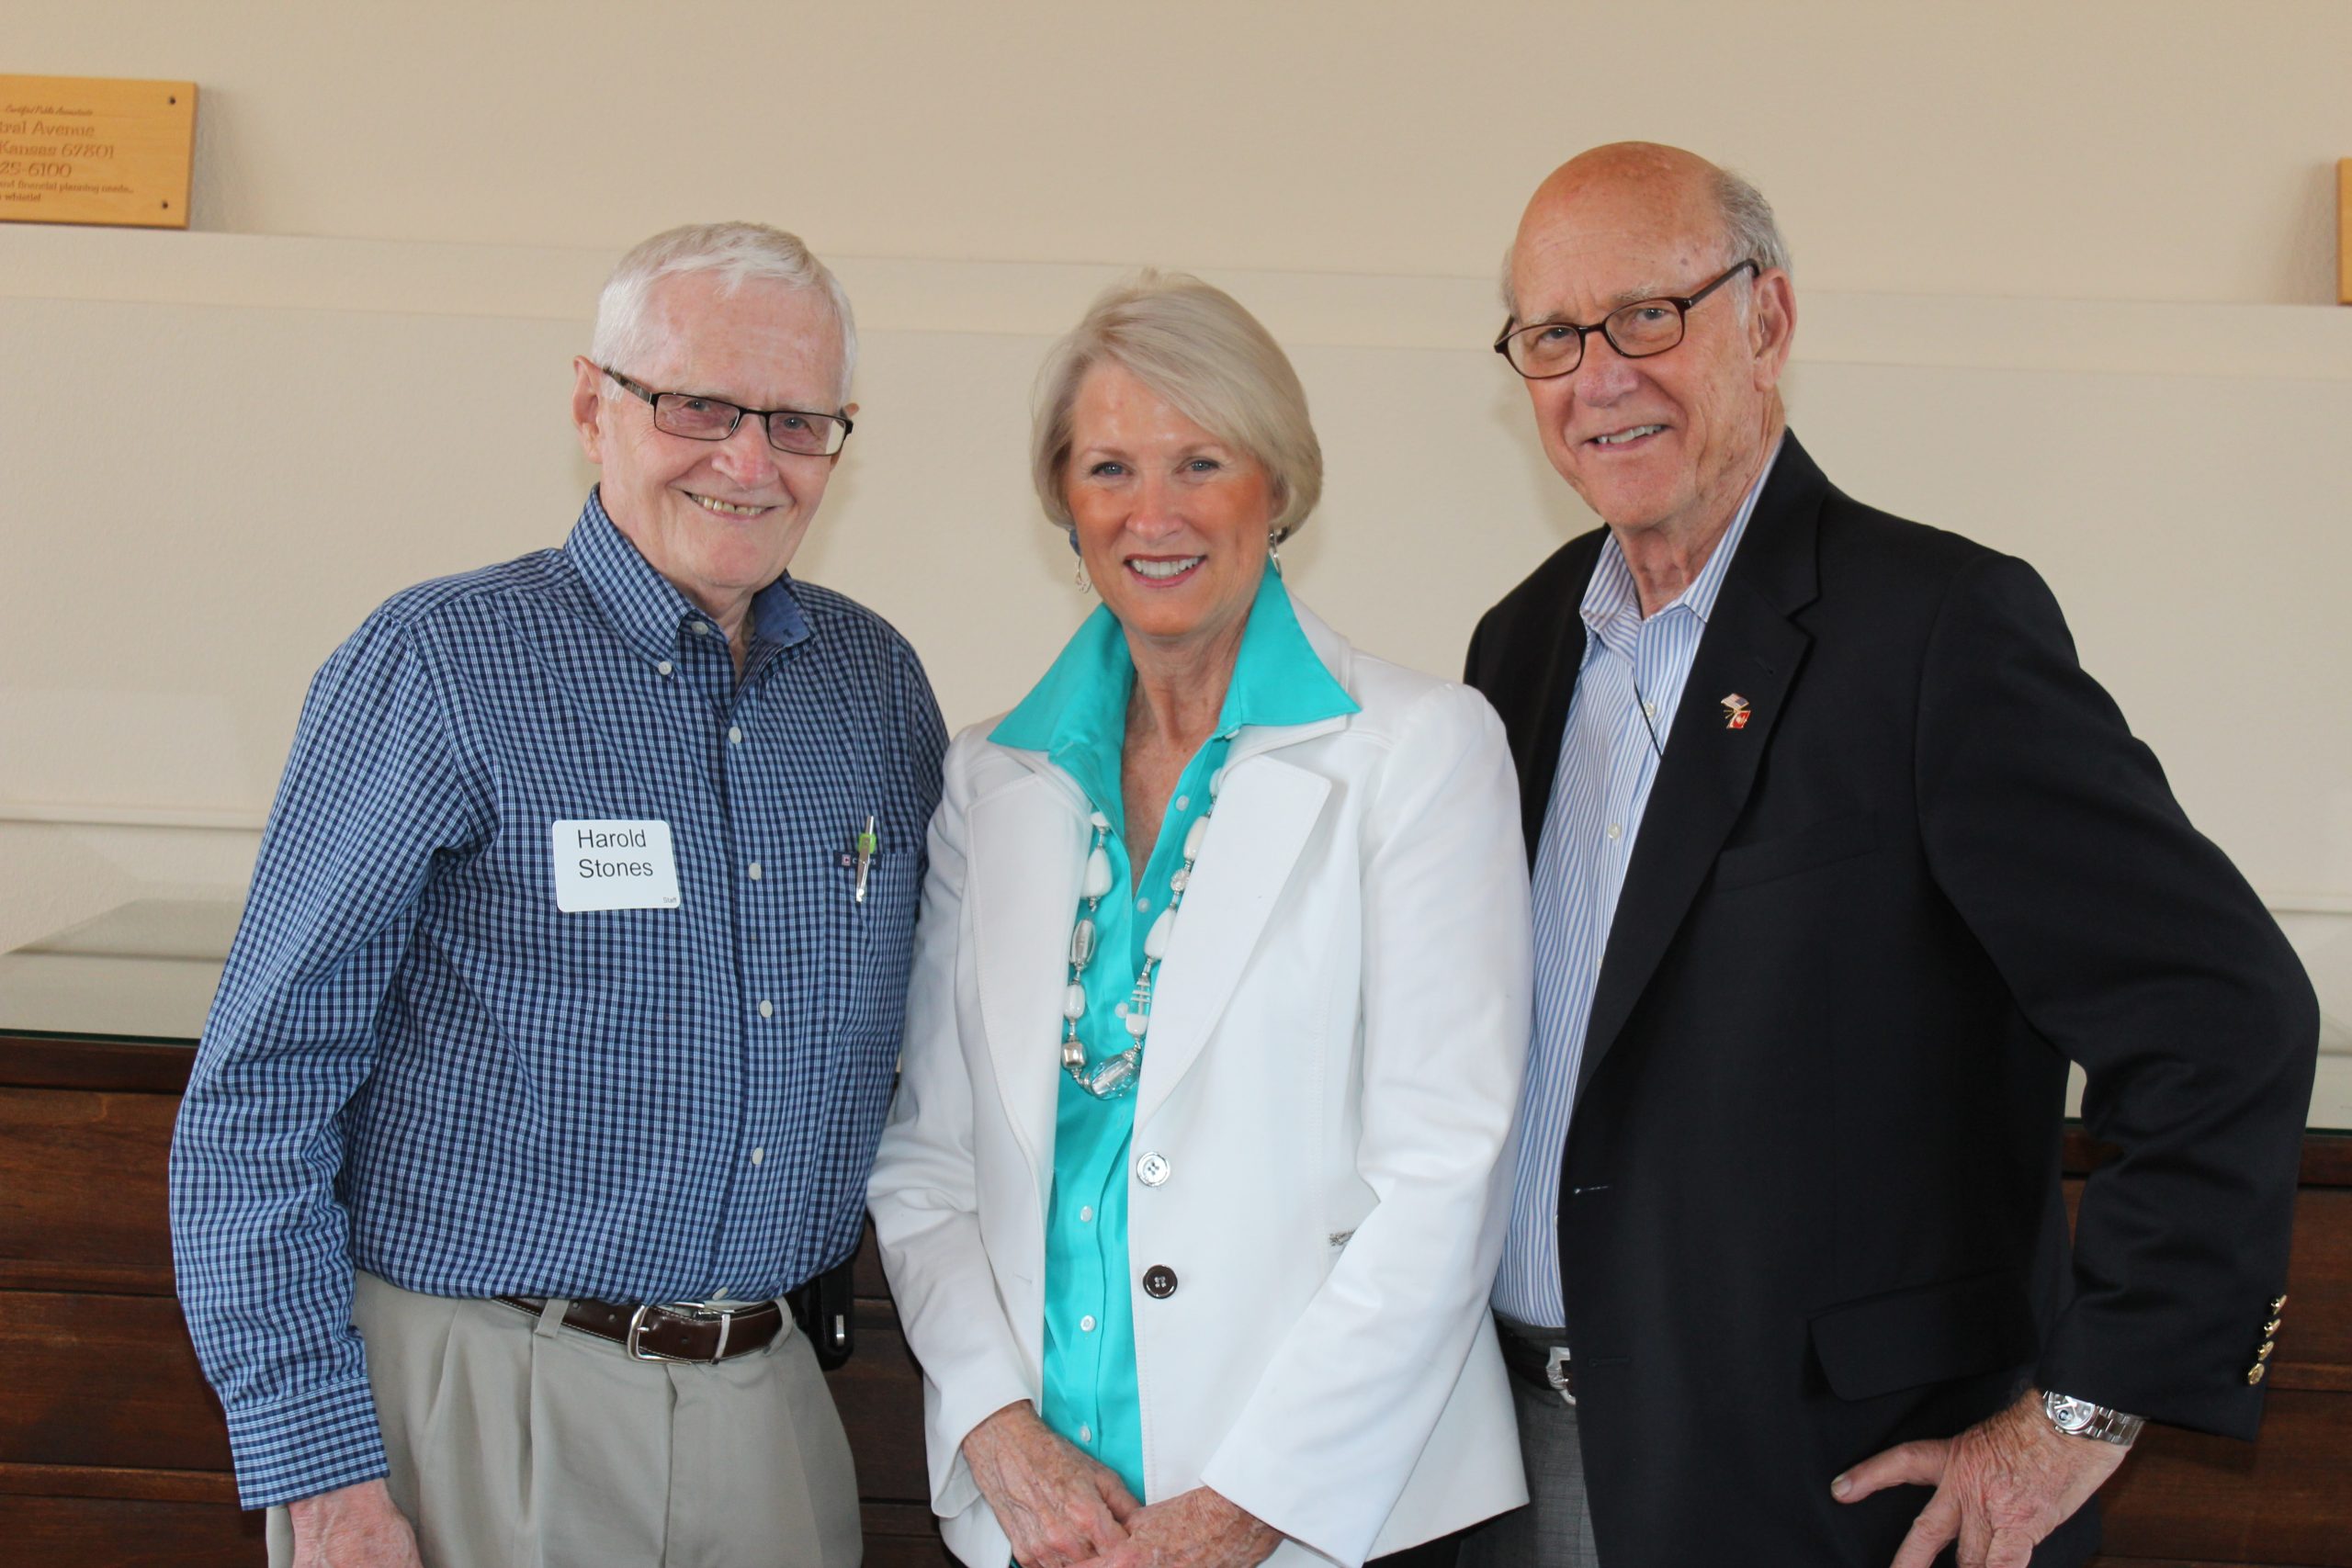 (Left) Harold Stones is pictured with Franki Roberts and U.S. Sen. Pat Roberts in 2013. (Journal photo by Dave Bergmeier.)